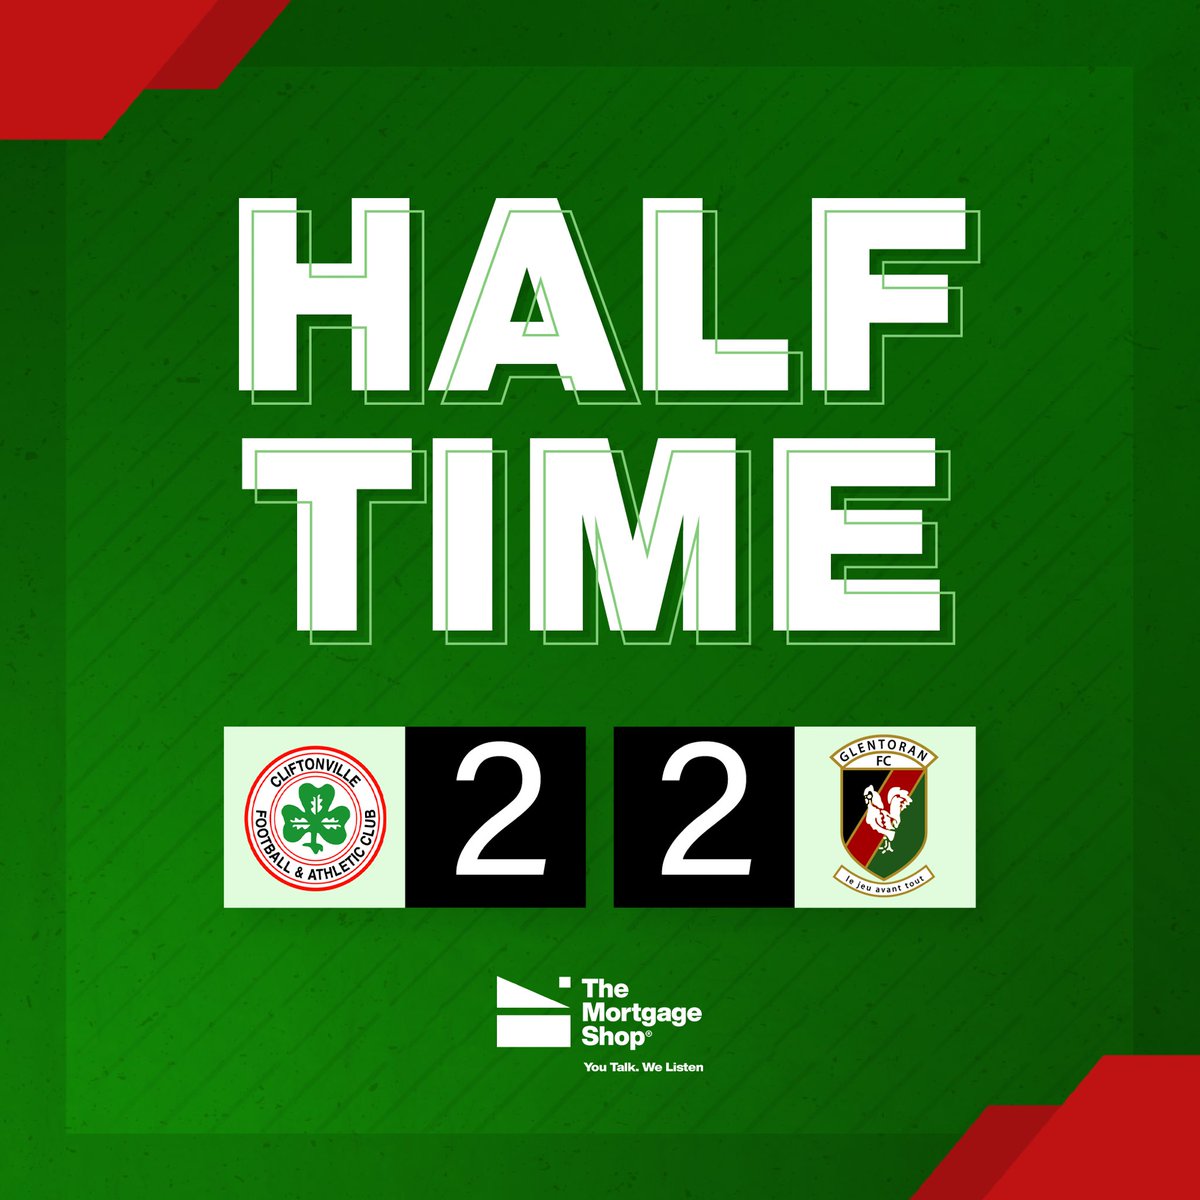 𝗛𝗔𝗟𝗙 𝗧𝗜𝗠𝗘 Goals from Emily Wilson and Demi Vance mean we go in tied 2-2 at the break. A big second half awaits. Come on you Glens!